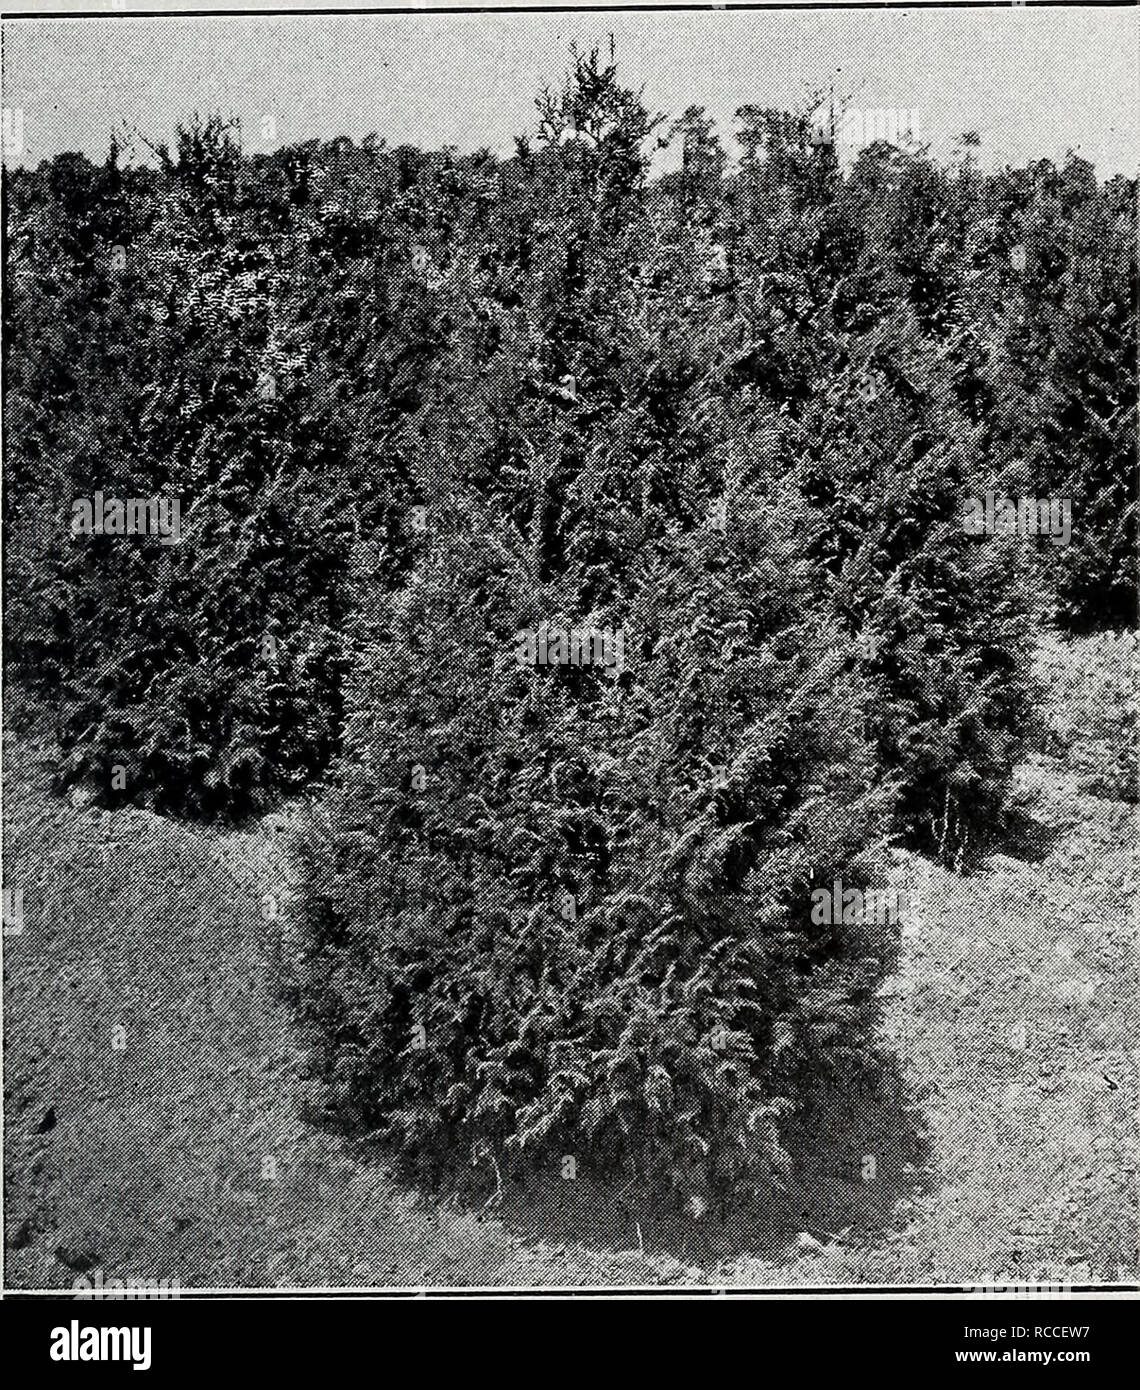 . The dixie planter : ornamentals exclusively fall 1932, - spring, 1933. Nurseries (Horticulture) Catalogs; Nursery stock Catalogs; Shrubs Catalogs; Trees Catalogs; Roses Catalogs; Fruit Catalogs. 7 Coniferous Evergreens, (Continued) Retinospora plumosa. Plume Japanese Cypress. Medium grower; forms a dense cone of fine texture. 2^ to 3 ft 2.00 3 to 3^^ ft 2.75 3% u 4 ft 3.50 h to i)V2 ft 5.50 bVz to 6 ft 7.00 6 to 61/2 ft 8.00 61/2 to 7 ft 9.00 Retinospora squarrosa veitchi. Veitch's Silver Cypress. Slow growth, broadly pyramidal; heavy, silver-grey foliage. 2 to 21/2 ft 2.75 2^ to 3 ft 3.75 3 Stock Photo